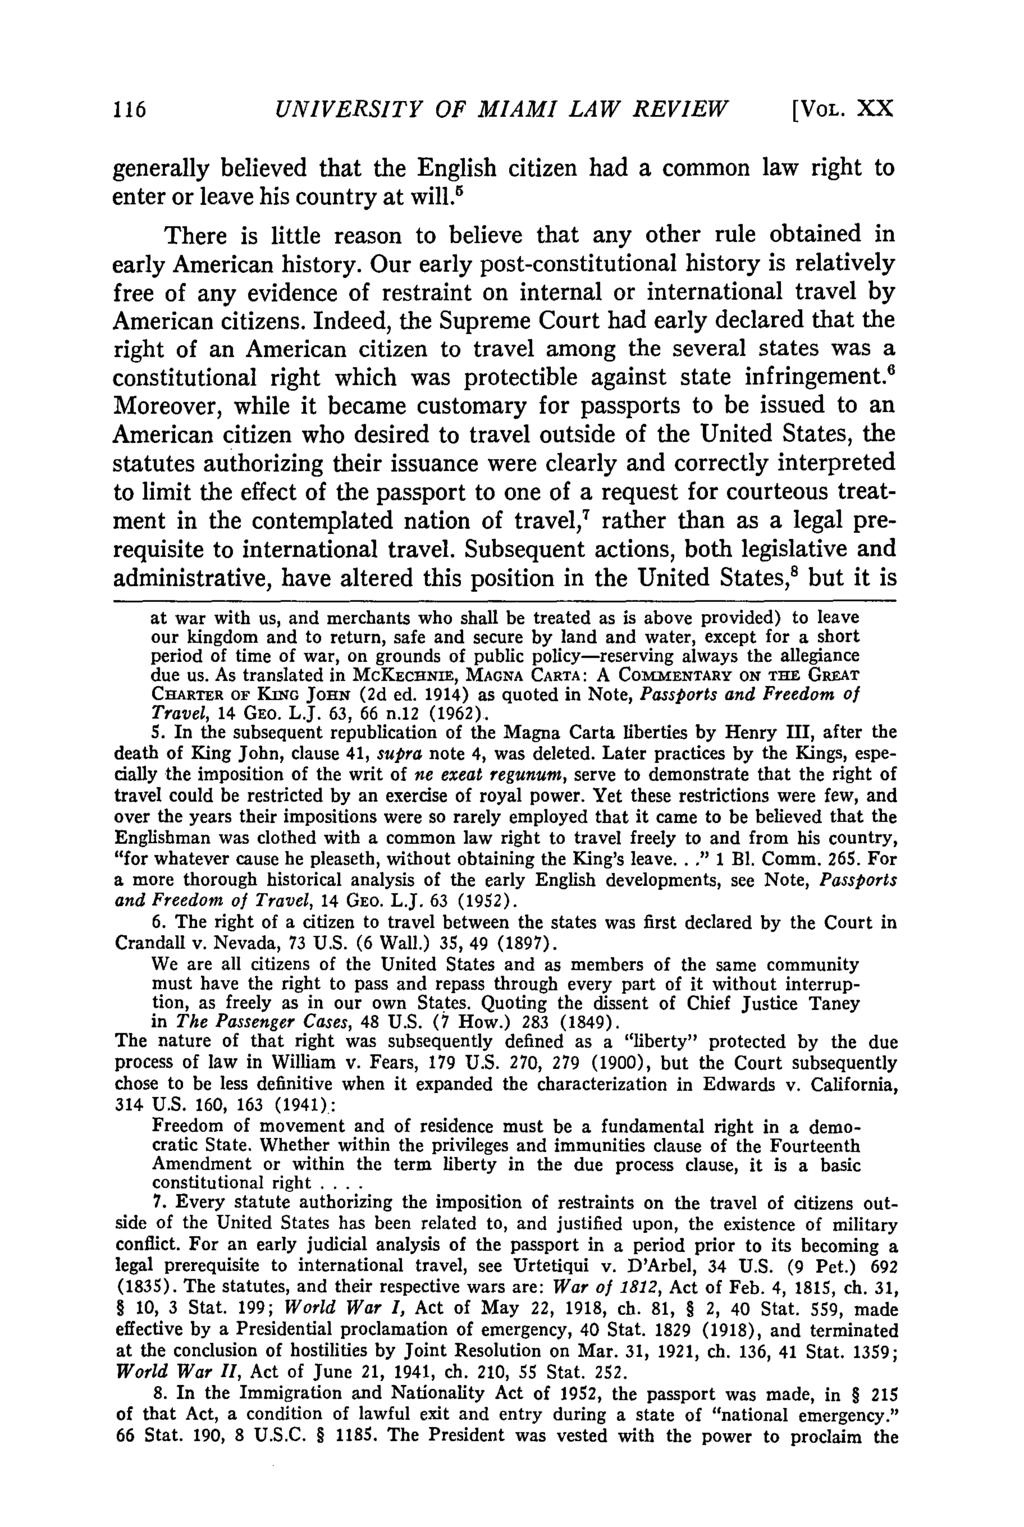 UNIVERSITY OF MIAMI LAW REVIEW [VOL. XX generally believed that the English citizen had a common law right to enter or leave his country at will.